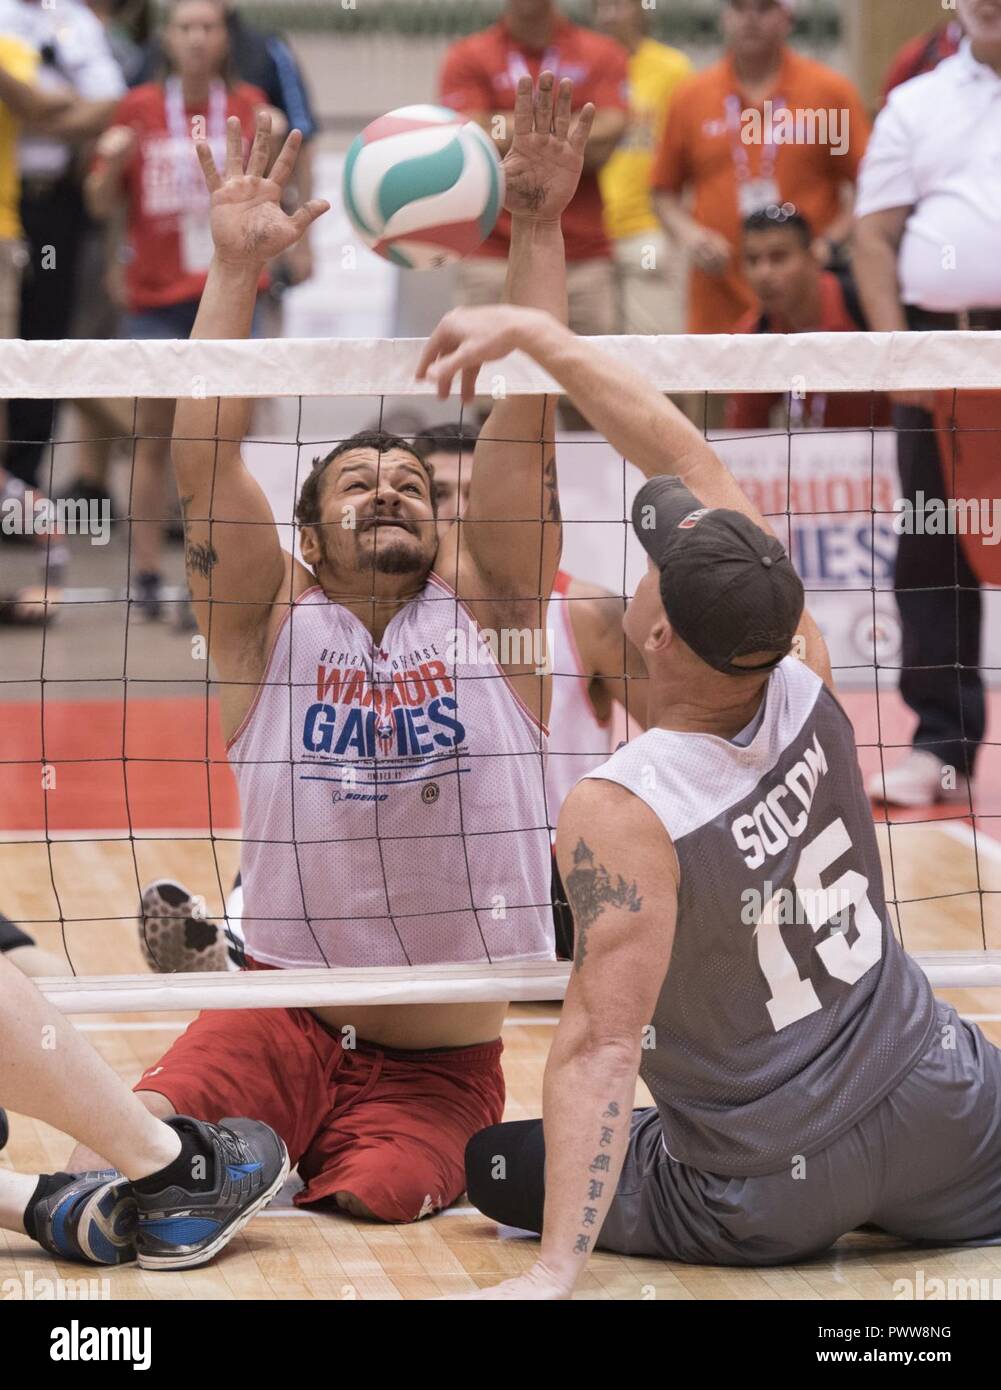 https://c8.alamy.com/comp/PWW8NG/marine-corps-veteran-lcpl-matthew-grashen-tries-to-block-a-shot-from-socom-msgt-benjamin-brodt-during-their-sitting-volleyball-game-at-the-2017-department-of-defense-warrior-games-in-chicago-ill-july-1-2017-the-dod-warrior-games-are-an-annual-event-allowing-wounded-ill-and-injured-service-members-and-veterans-to-compete-in-paralympic-style-sports-including-archery-cycling-field-shooting-sitting-volleyball-swimming-track-and-wheelchair-basketball-PWW8NG.jpg